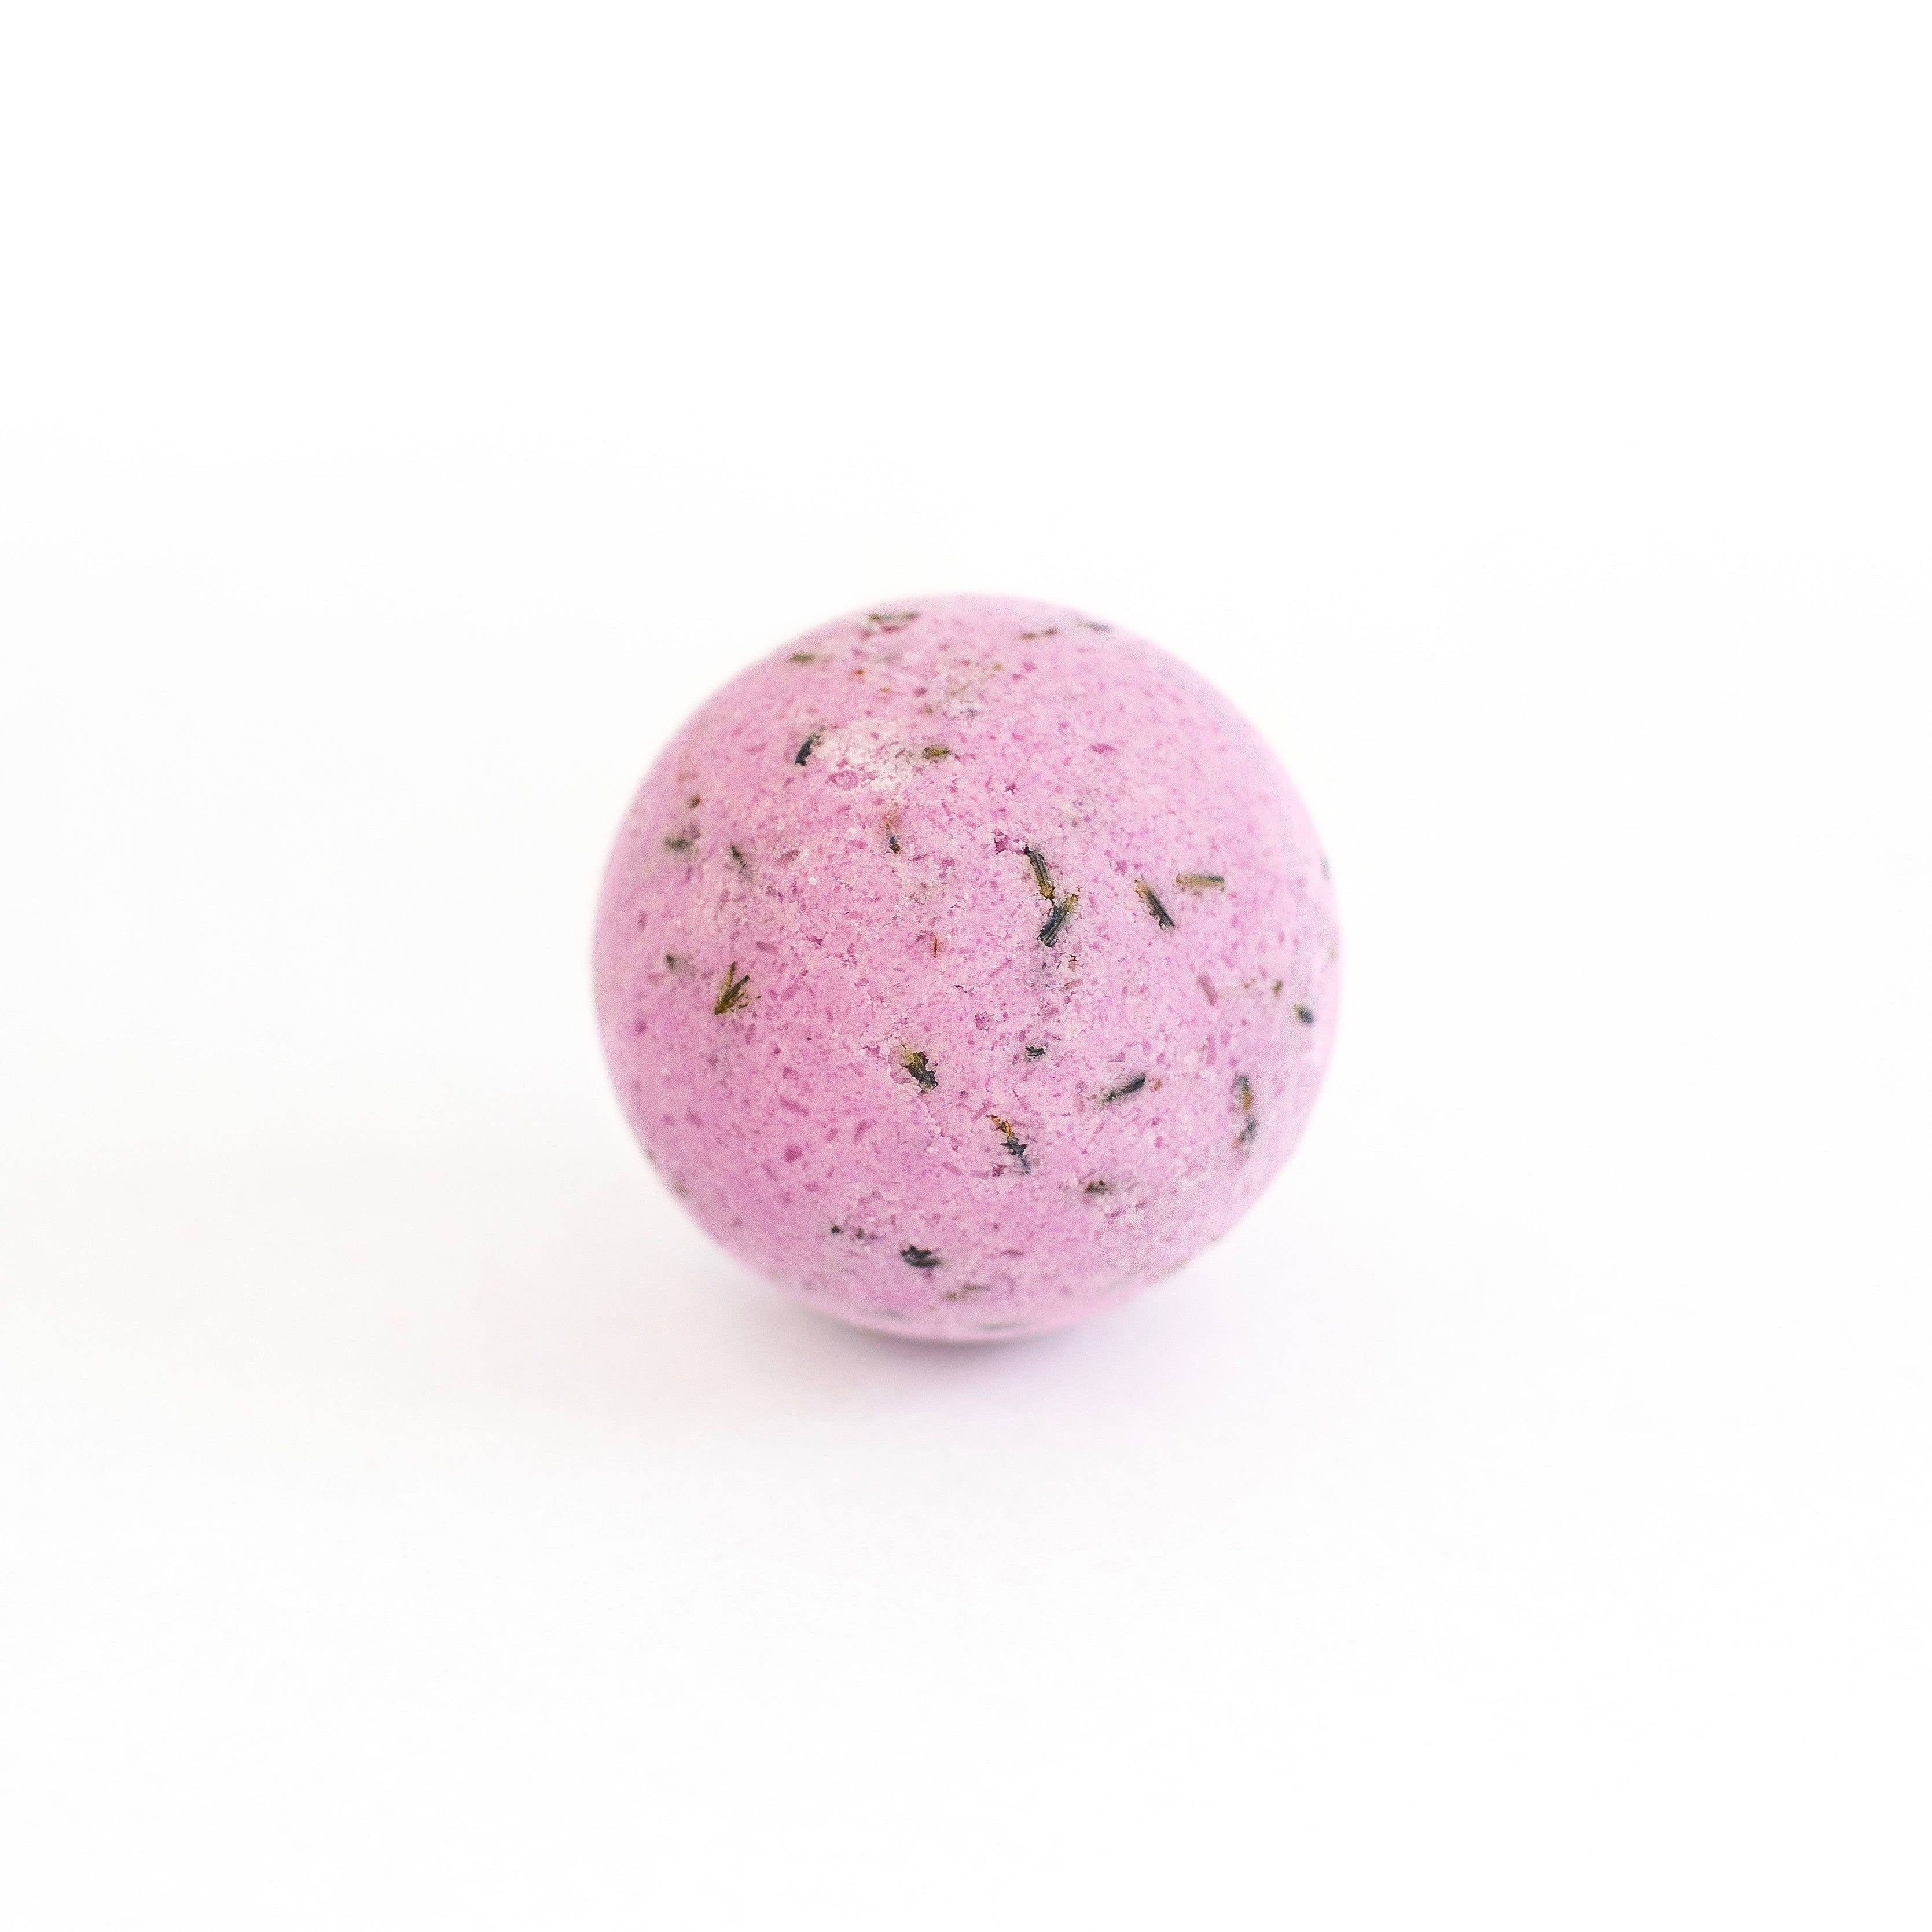 Handcrafted Lavender Bath Bomb